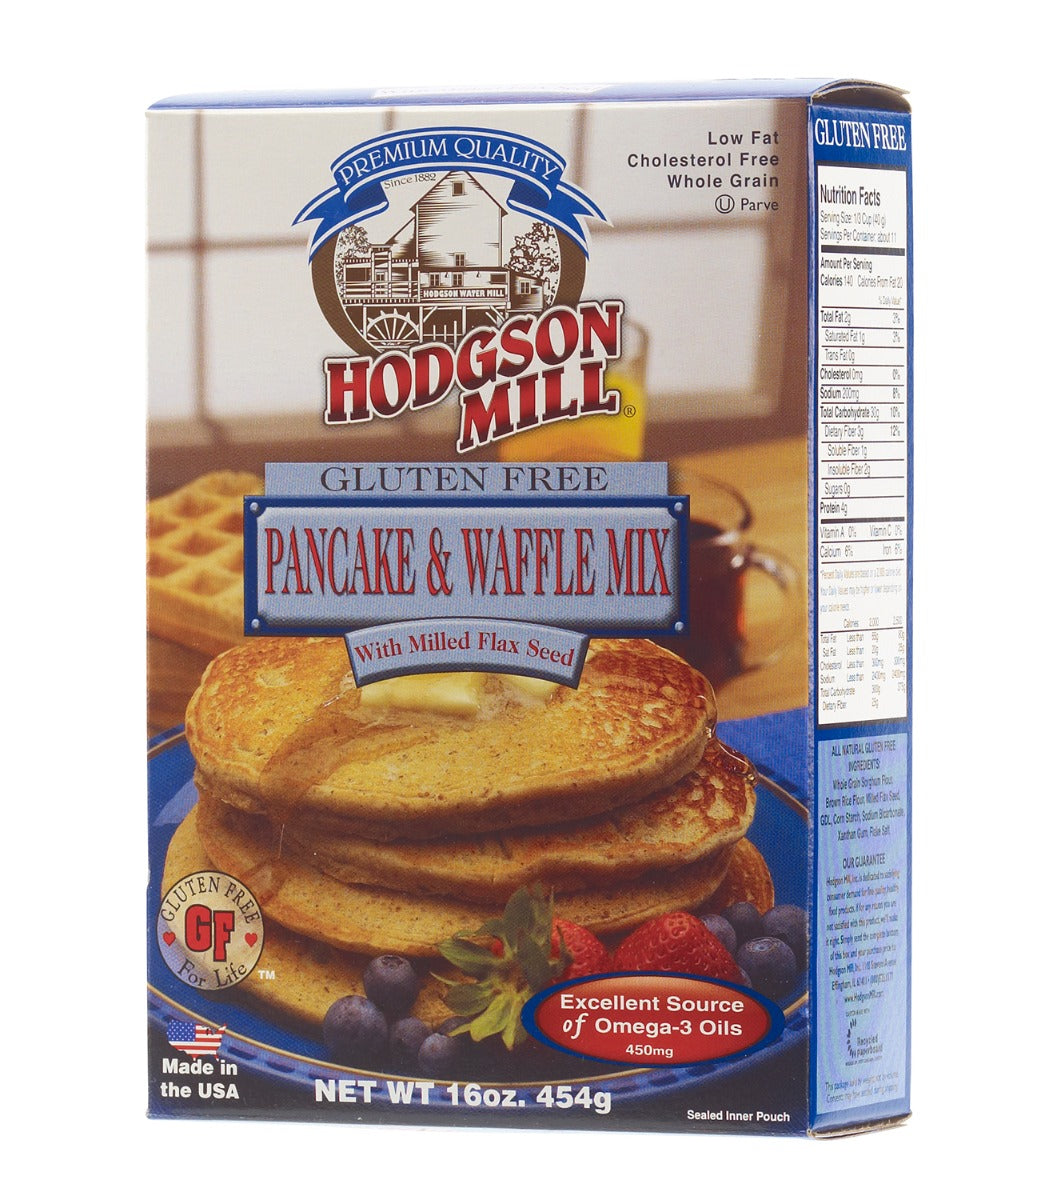 HODGSON MILL: Gluten Free Pancake & Waffle Mix with Flax Seed, 16 oz - Vending Business Solutions